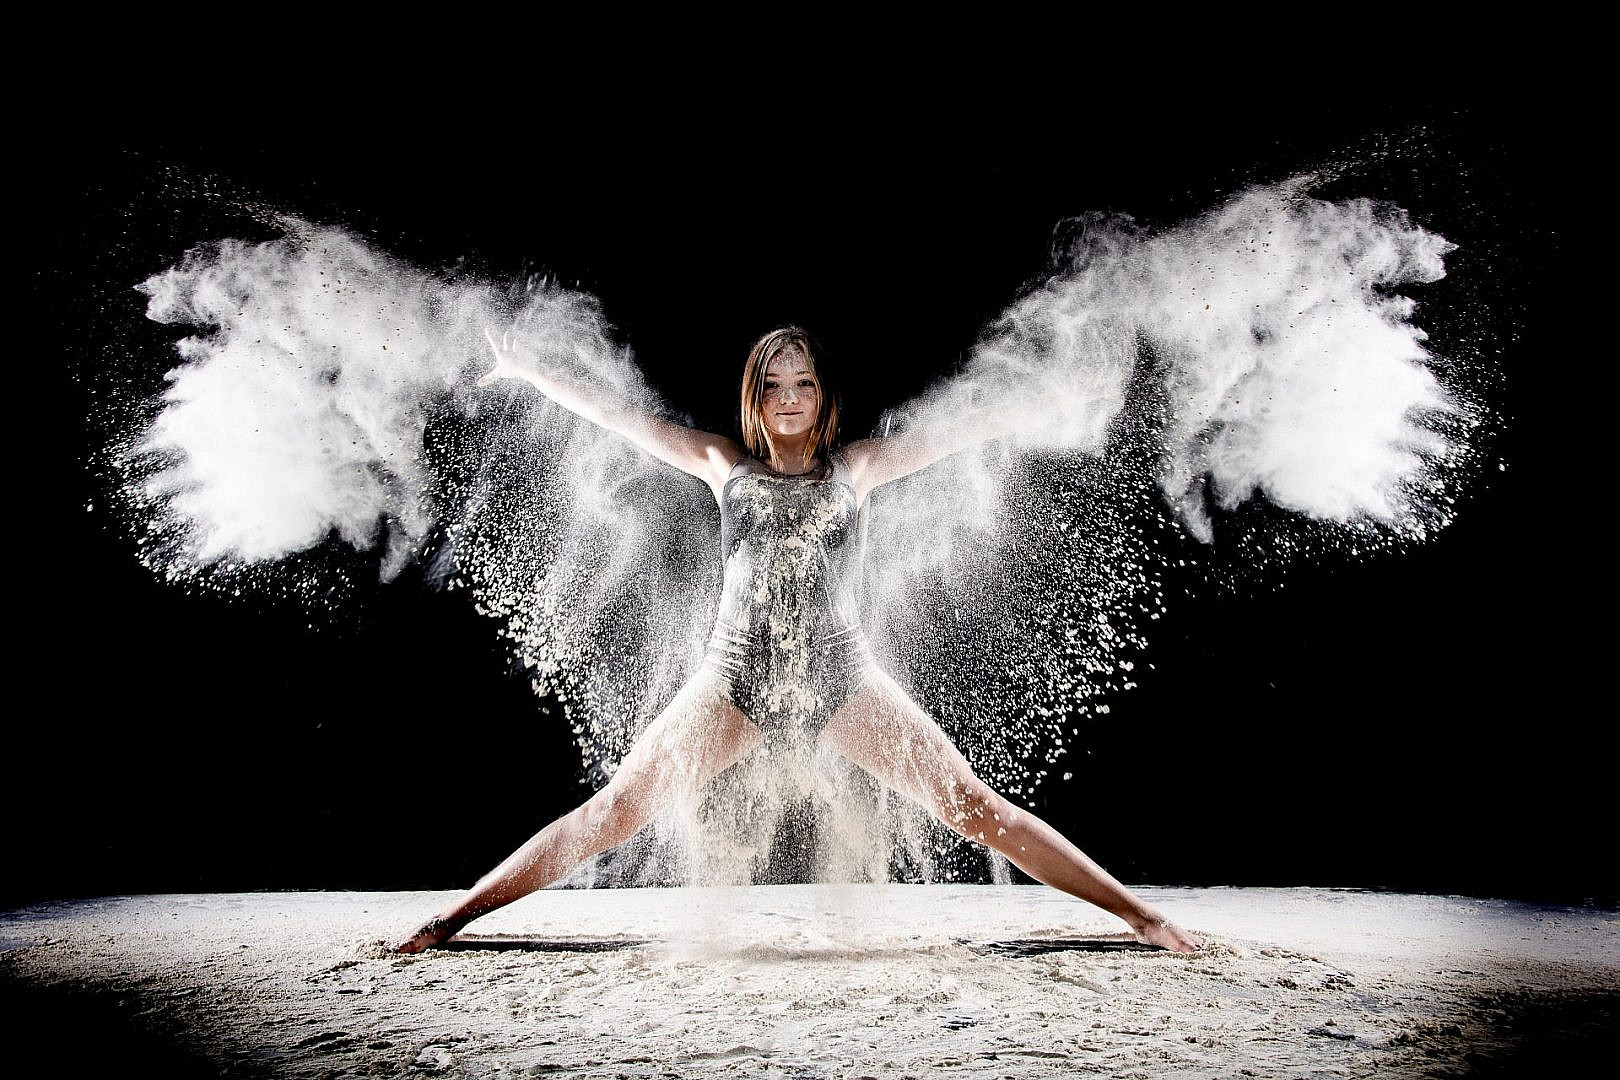 Powder Shoot Photography | Powder Dance Photography Services